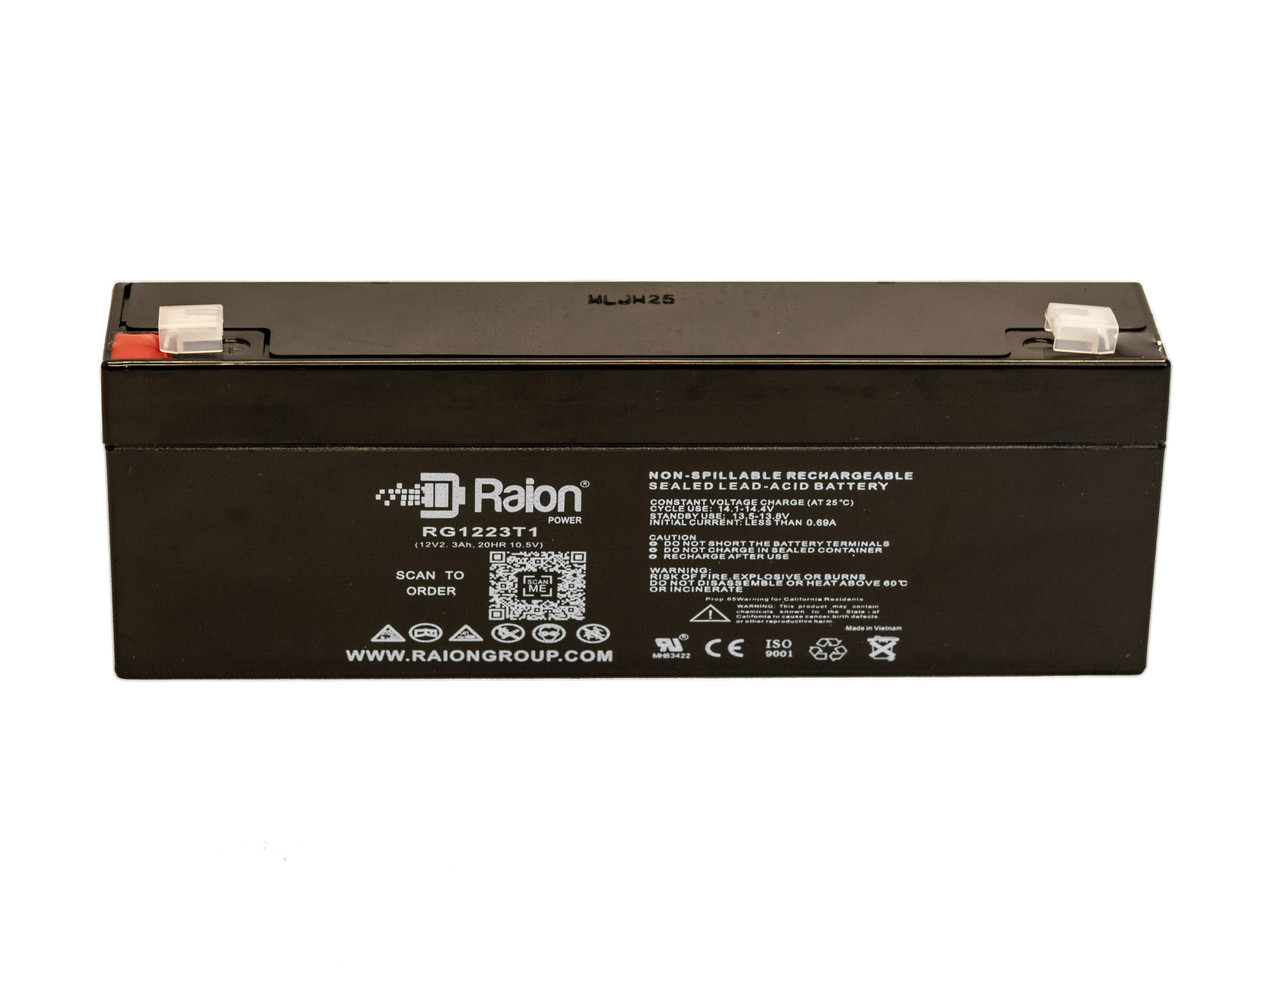 Raion Power 12V 2.3Ah SLA Battery With T1 Terminals For Brentwood Instruments LS285 Defib